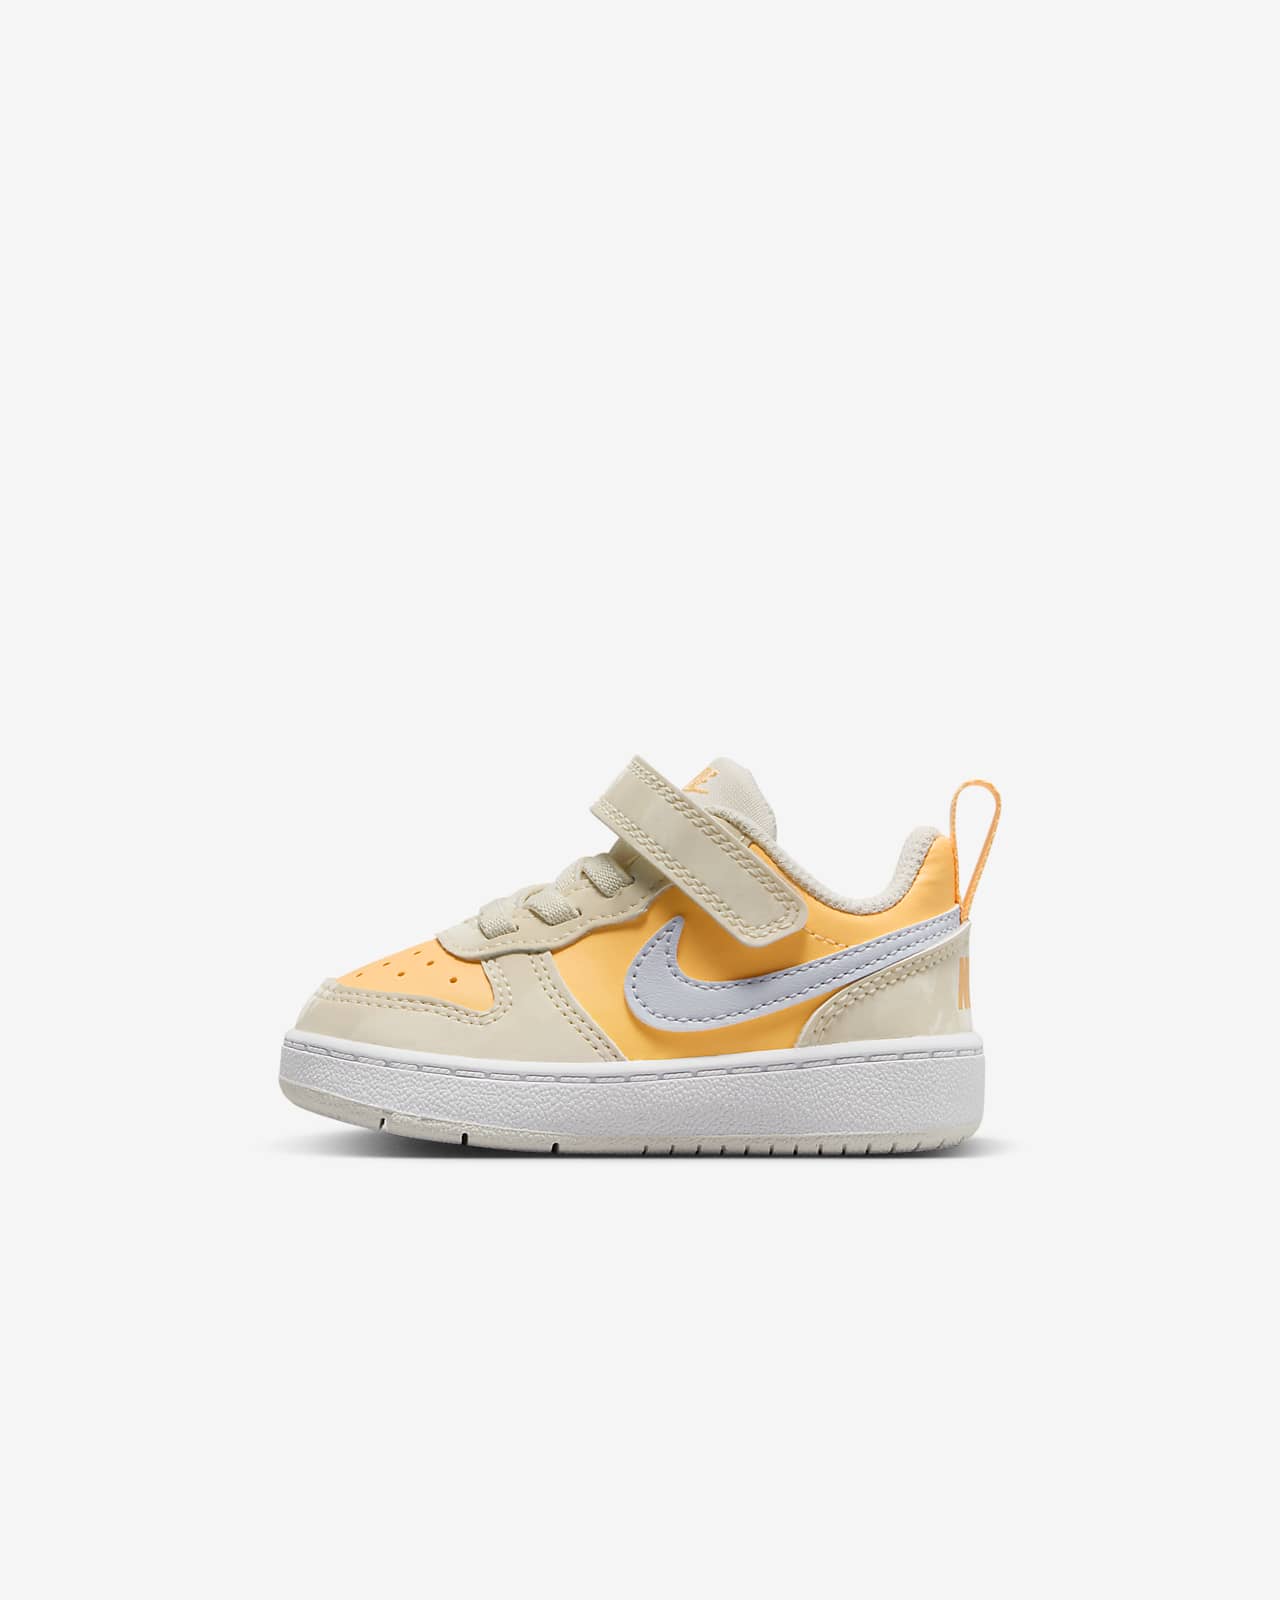 Nike Court Borough Low Recraft Baby/Toddler Shoes